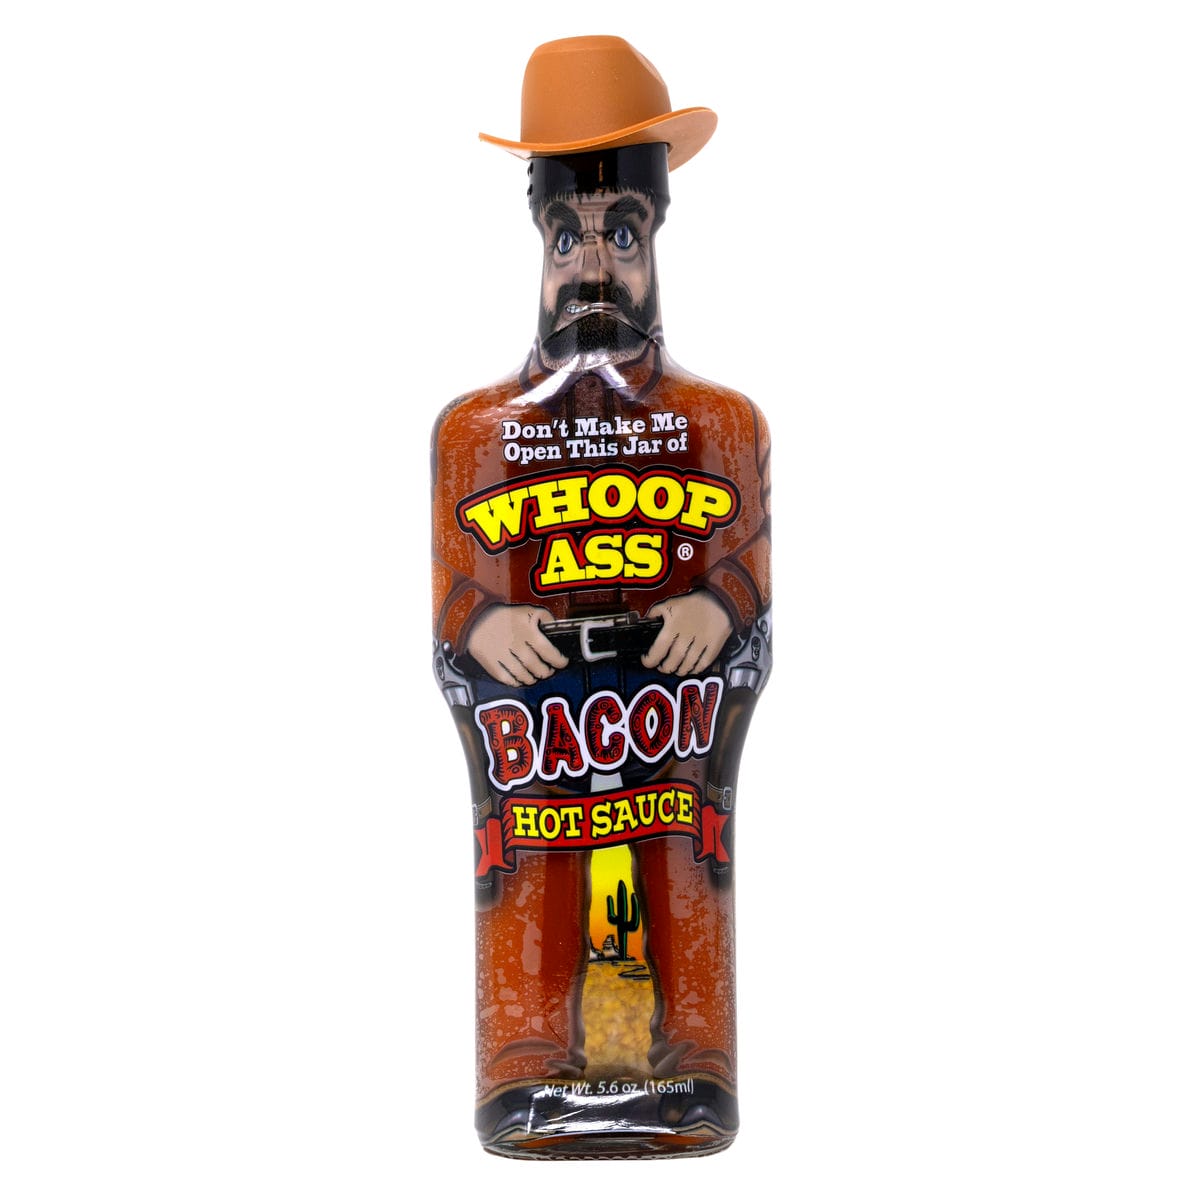 Whoop Ass Bacon Hot Sauce Front